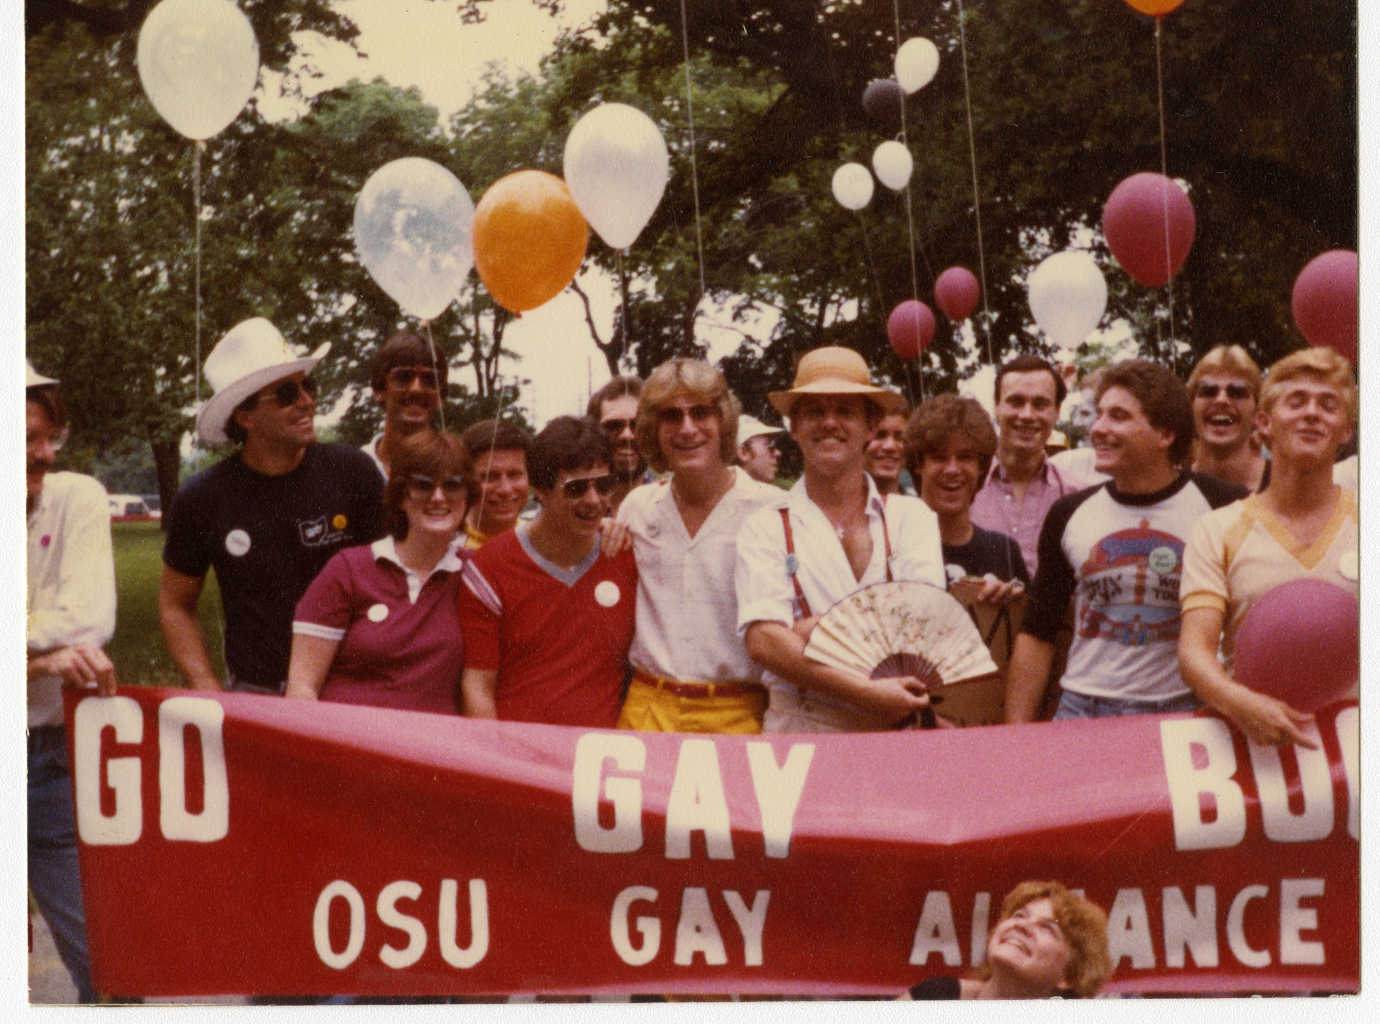 An NEH Common Heritage grant helped Ohio History Connection digitize the history of Columbus's LGBTQ community. Image courtesy of Ohio History Connection.